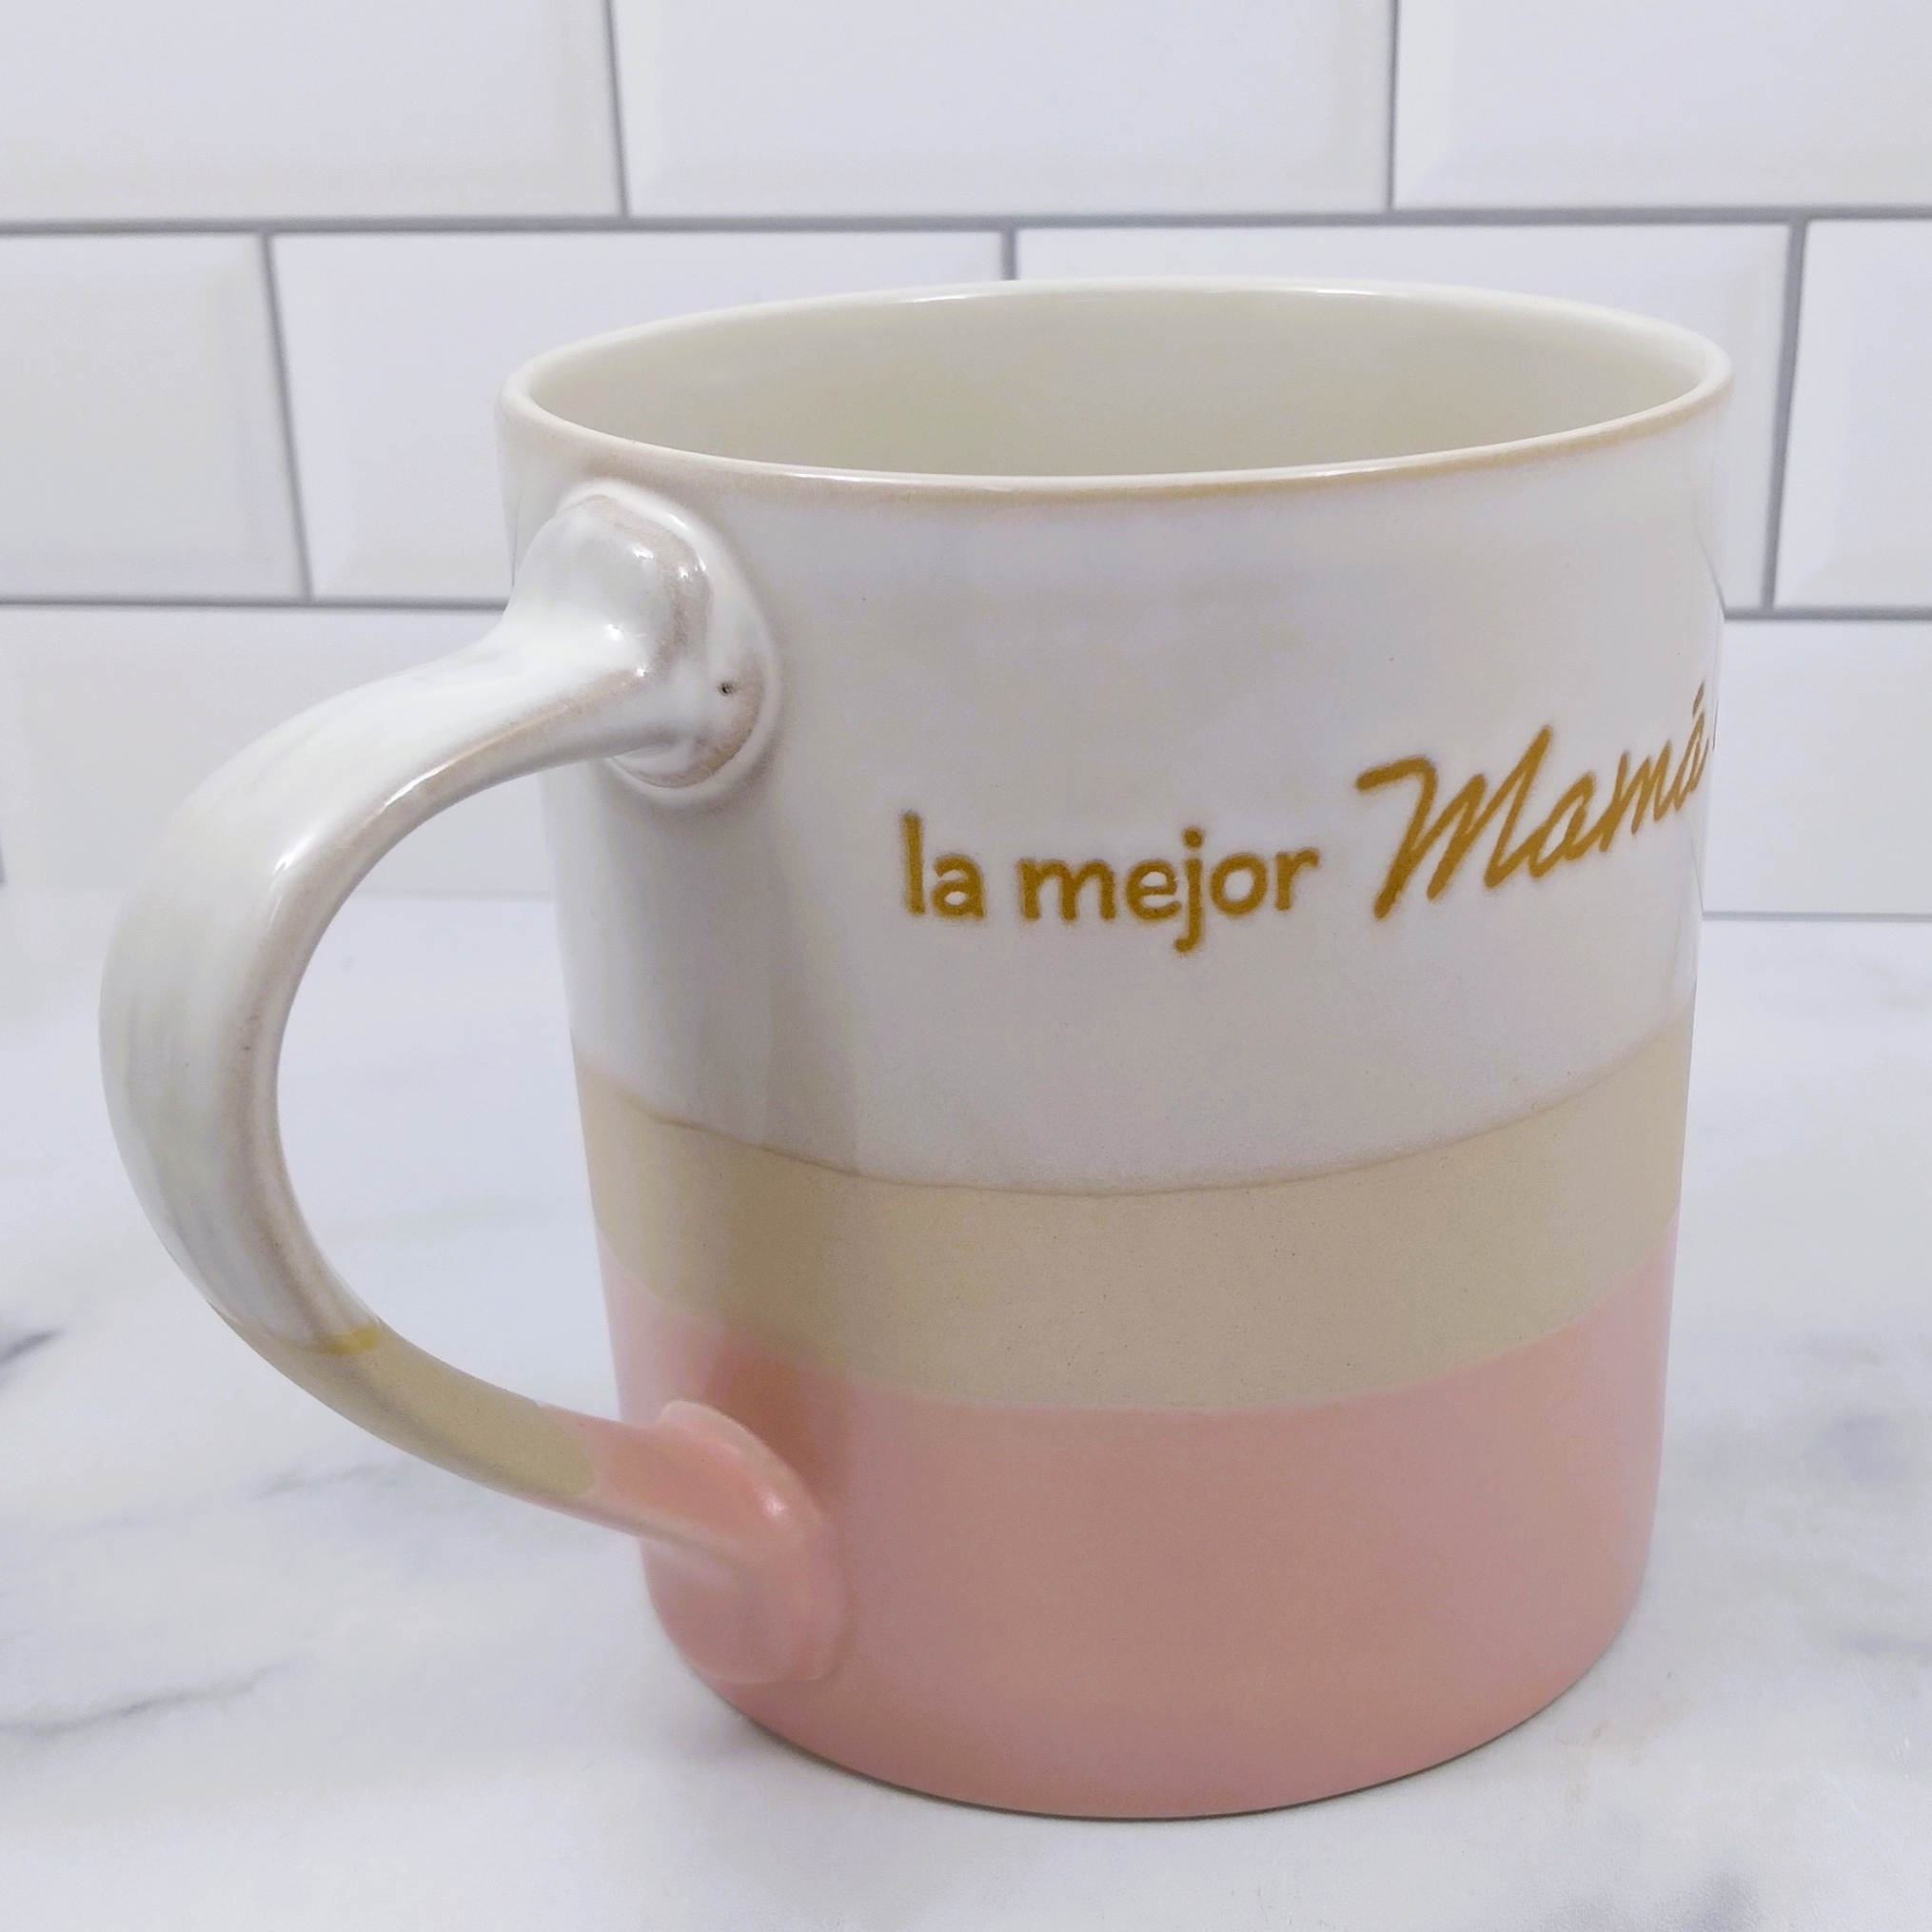 This Best Mom in Spanish Coffee Mug Ceramic Beverage Tea Cup 16oz 473ml by Blue Sky is made with love by Premier Homegoods! Shop more unique gift ideas today with Spots Initiatives, the best way to support creators.